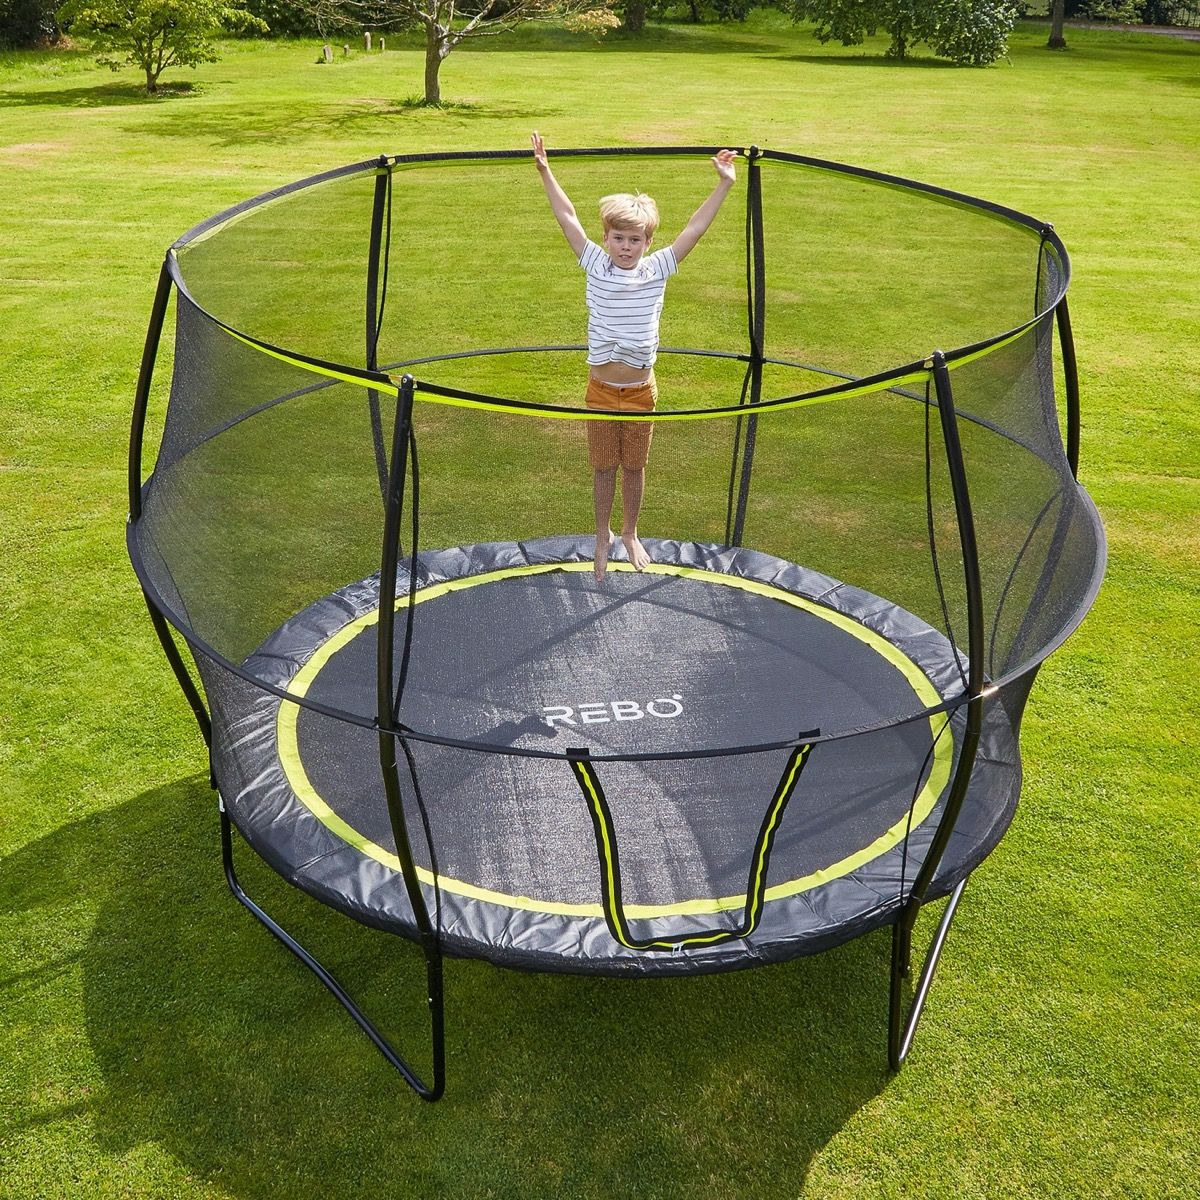 Rebo 12FT Base Jump Trampoline With Halo II Enclosure